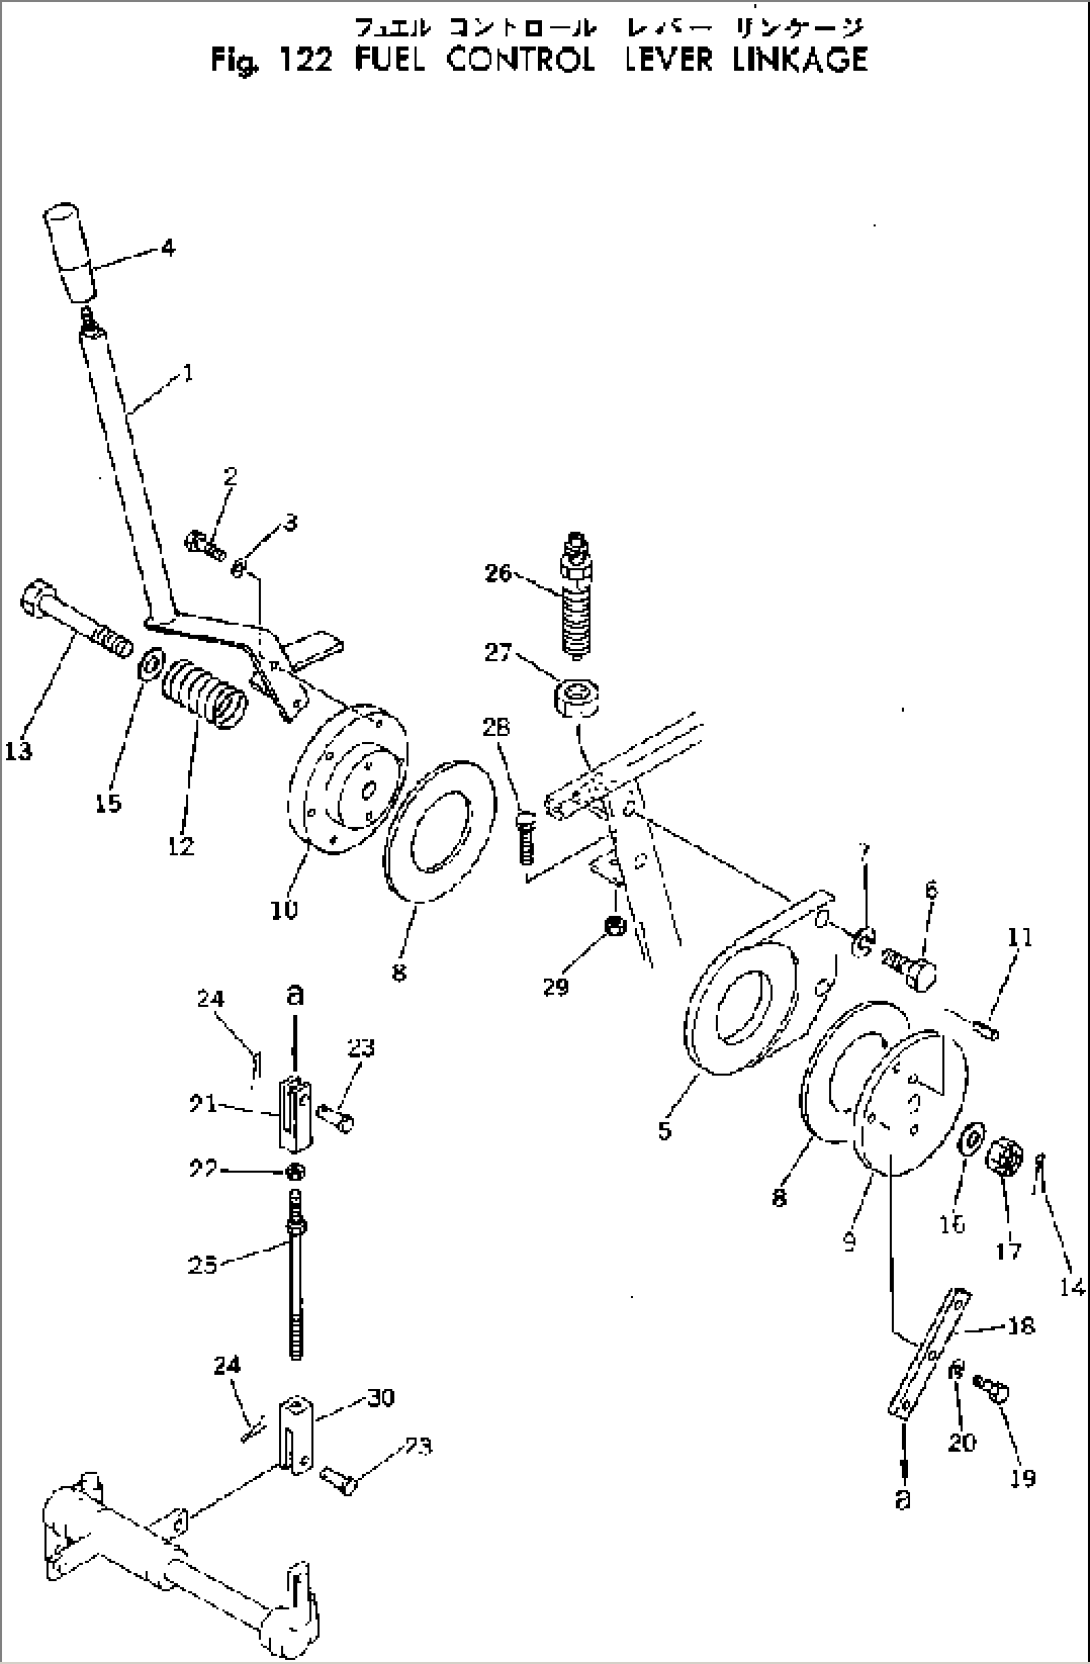 FUEL CONTROL LEVER LINKAGE